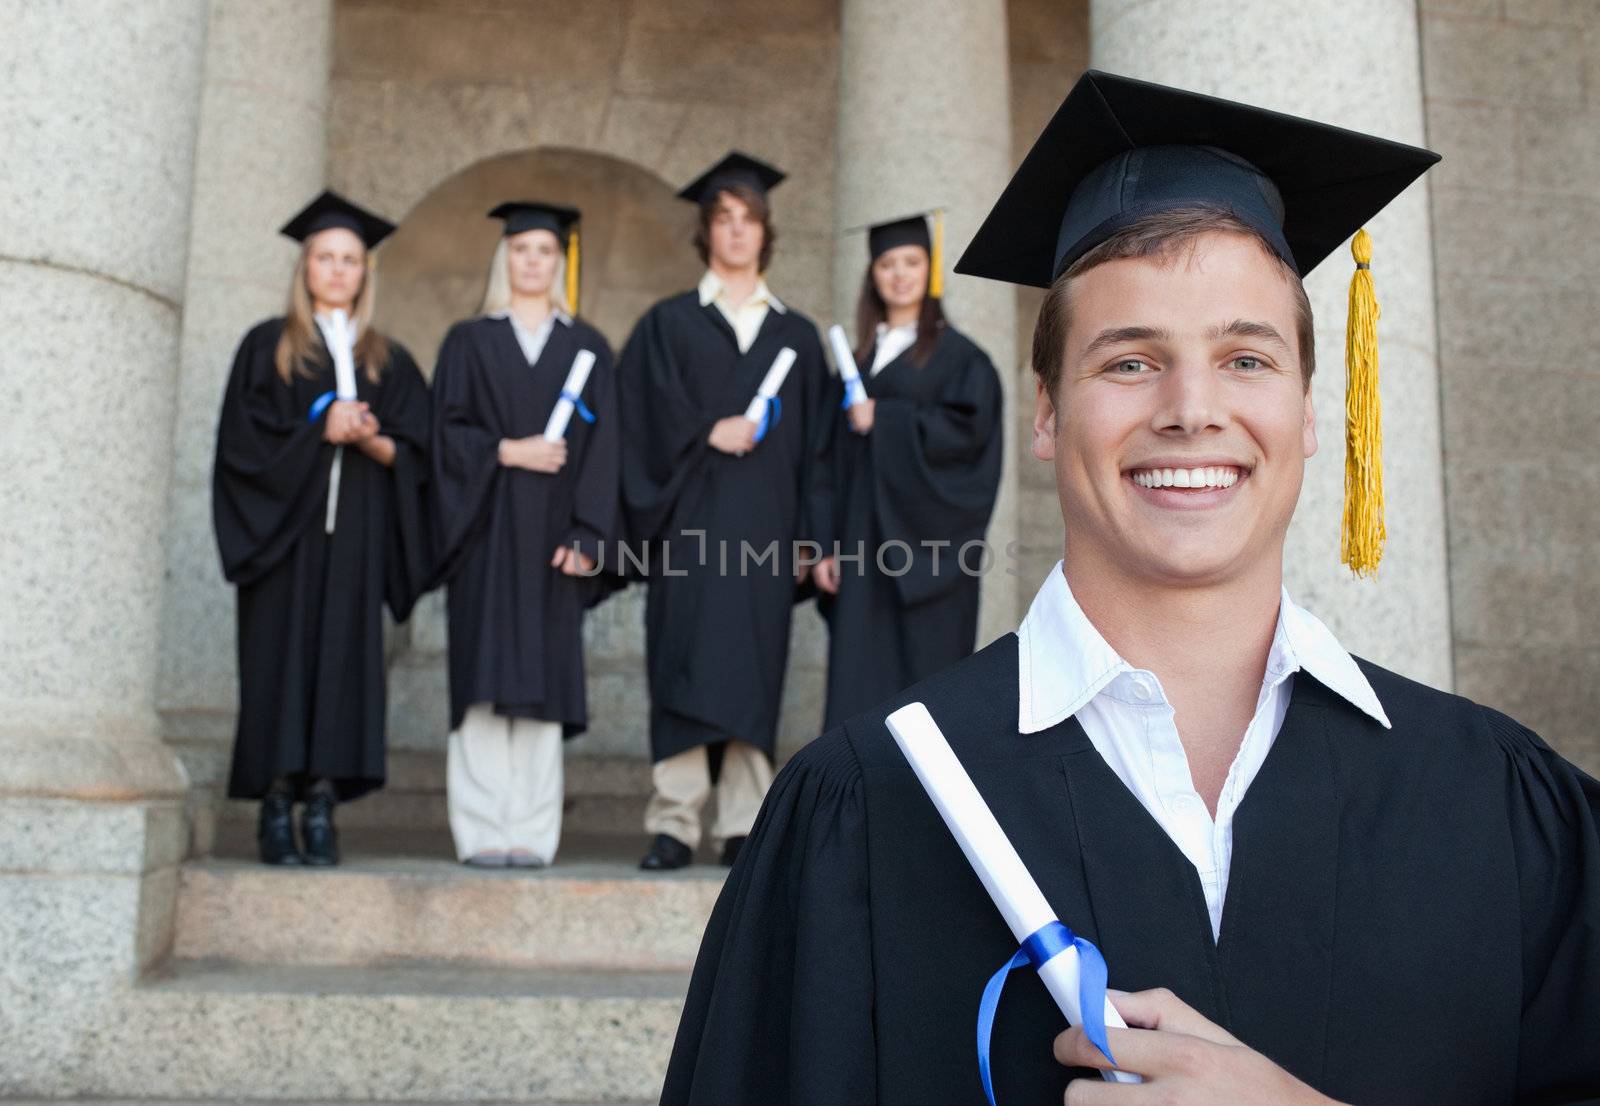 Close-up of a happy graduate smiling with her friends in background in front of the university